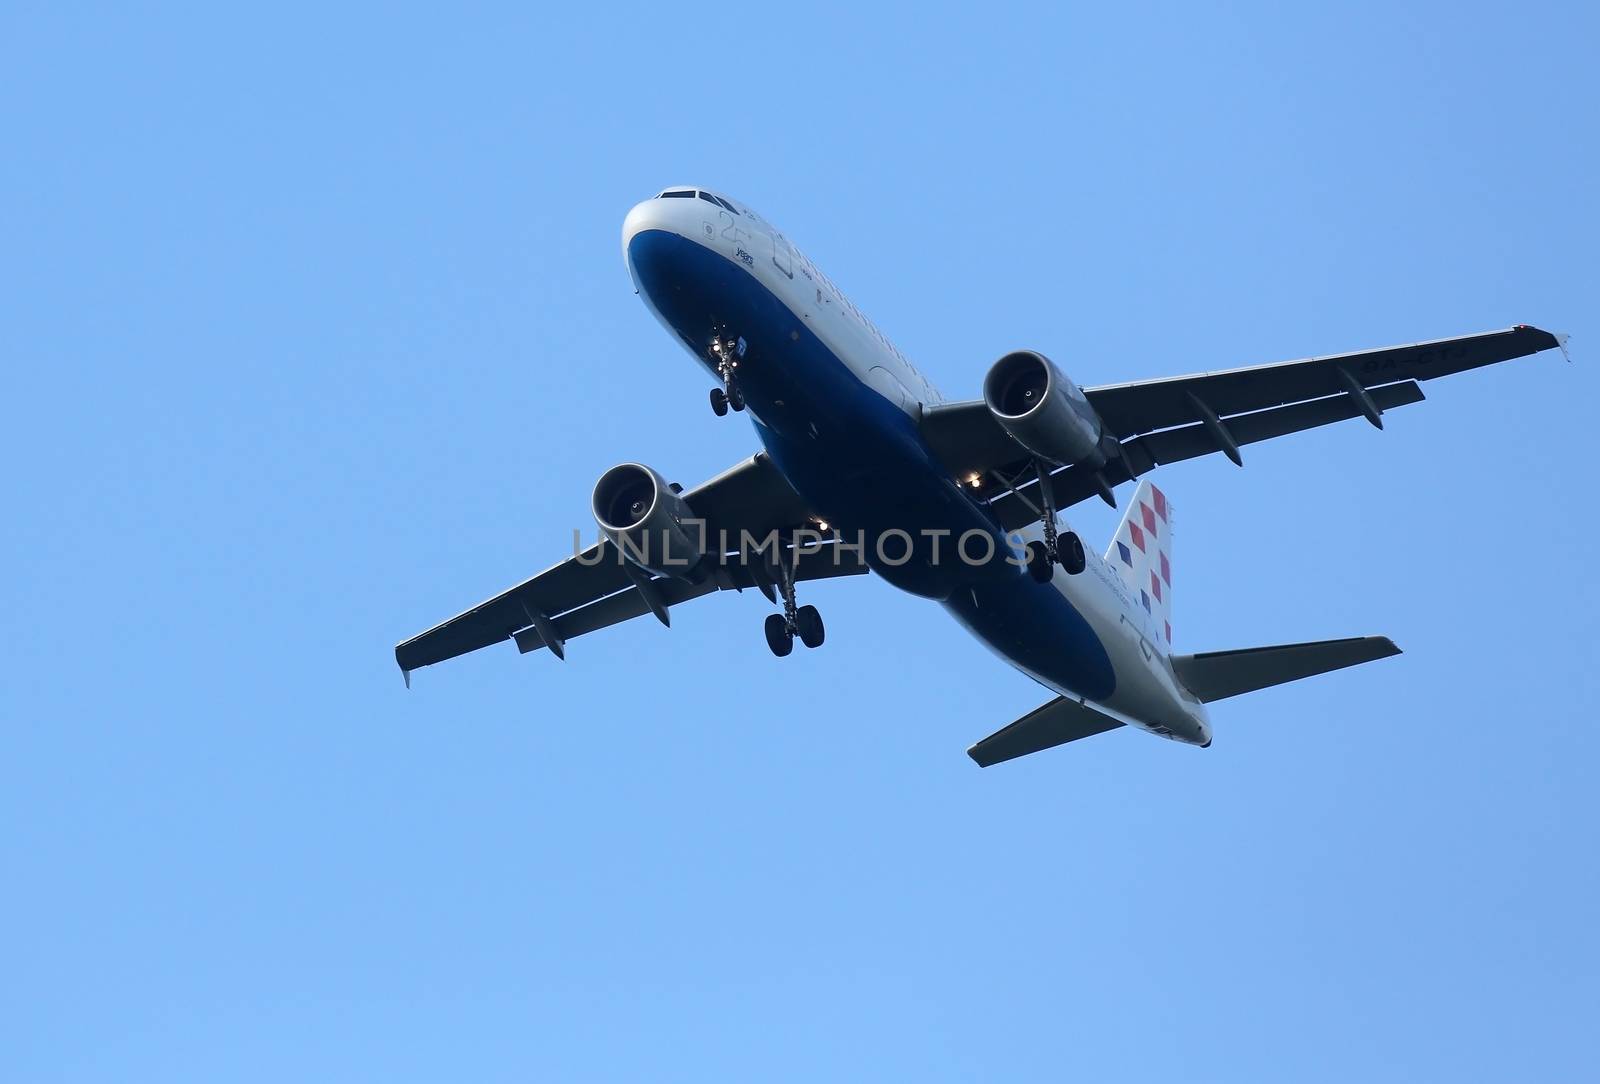 Airbus A320, registration 9A-CTJ of Croatia Airlines landing at Zagreb Airport Pleso